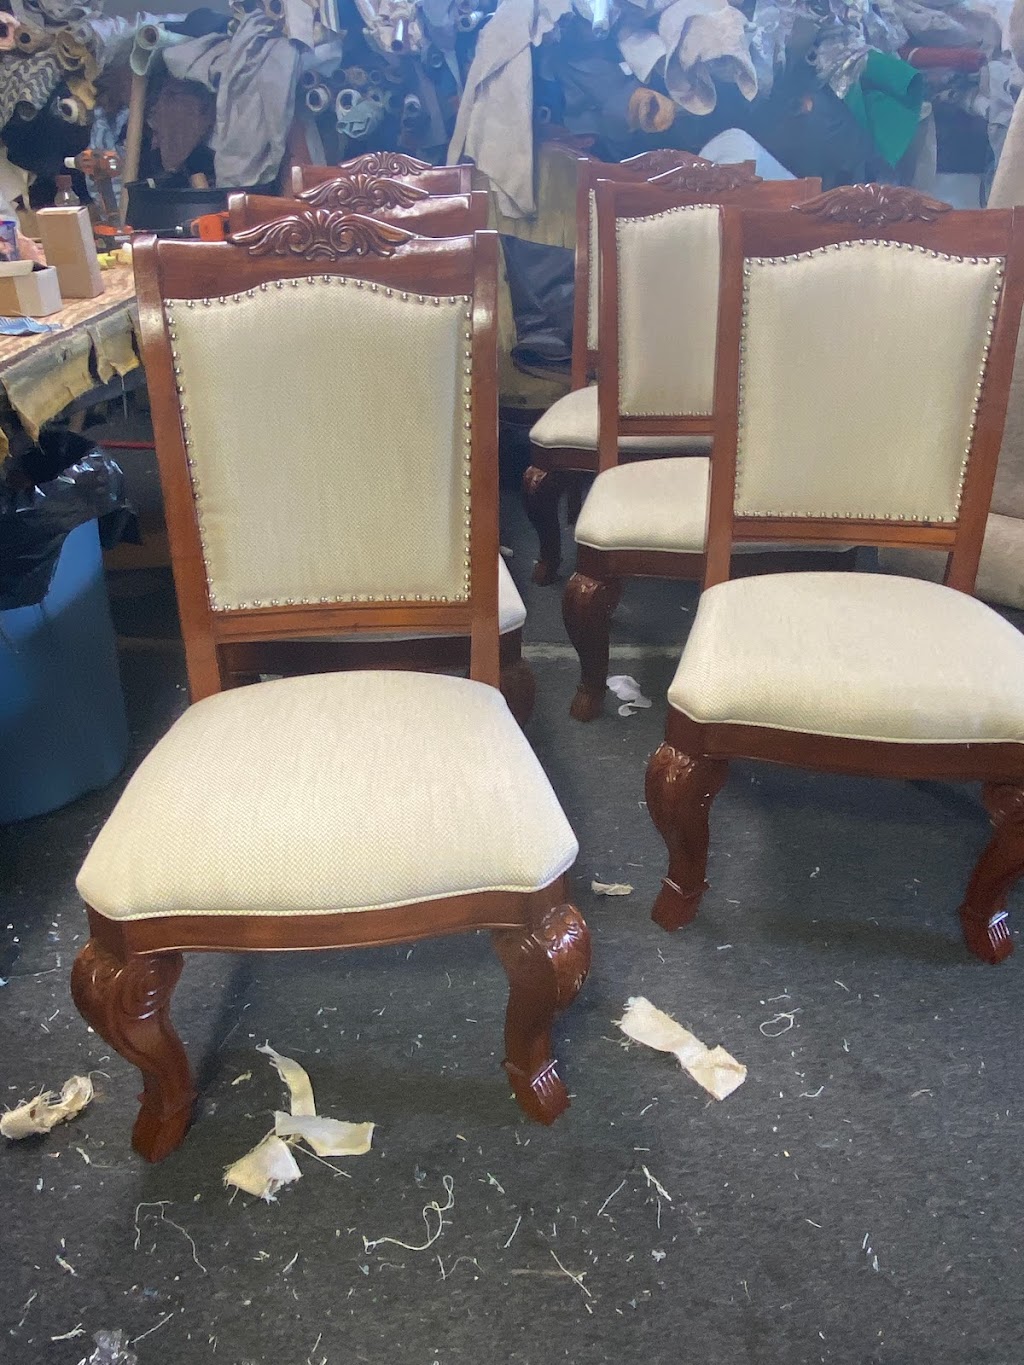 Upholstery by Antonio | 418 N Irving St, Allentown, PA 18109 | Phone: (610) 597-3692